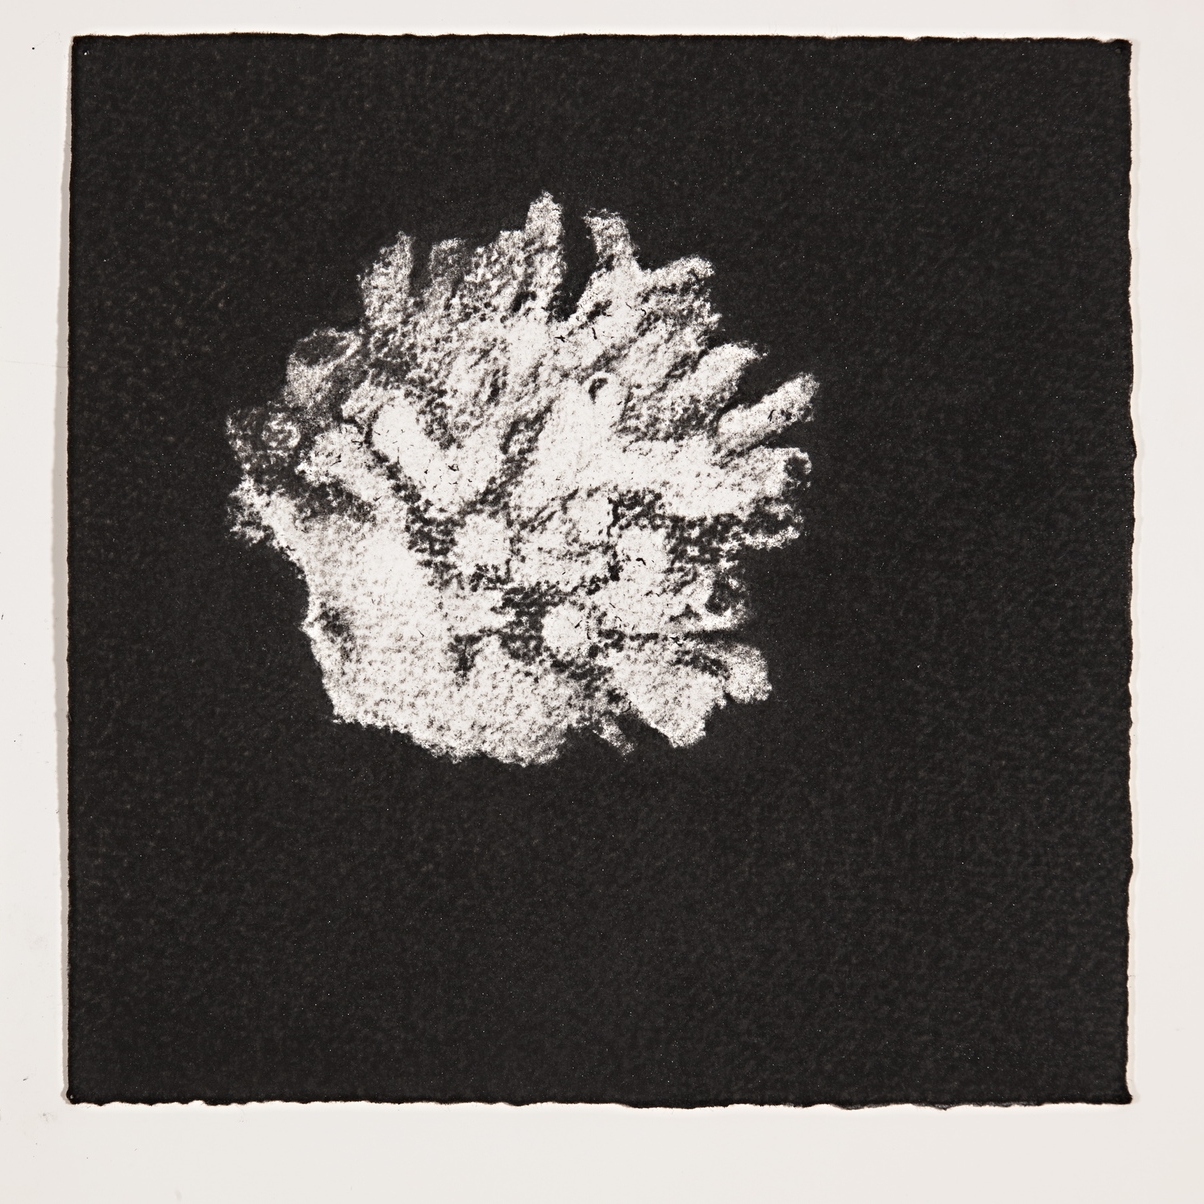  Coral, 2014, charcoal on paper, 19x19cm 